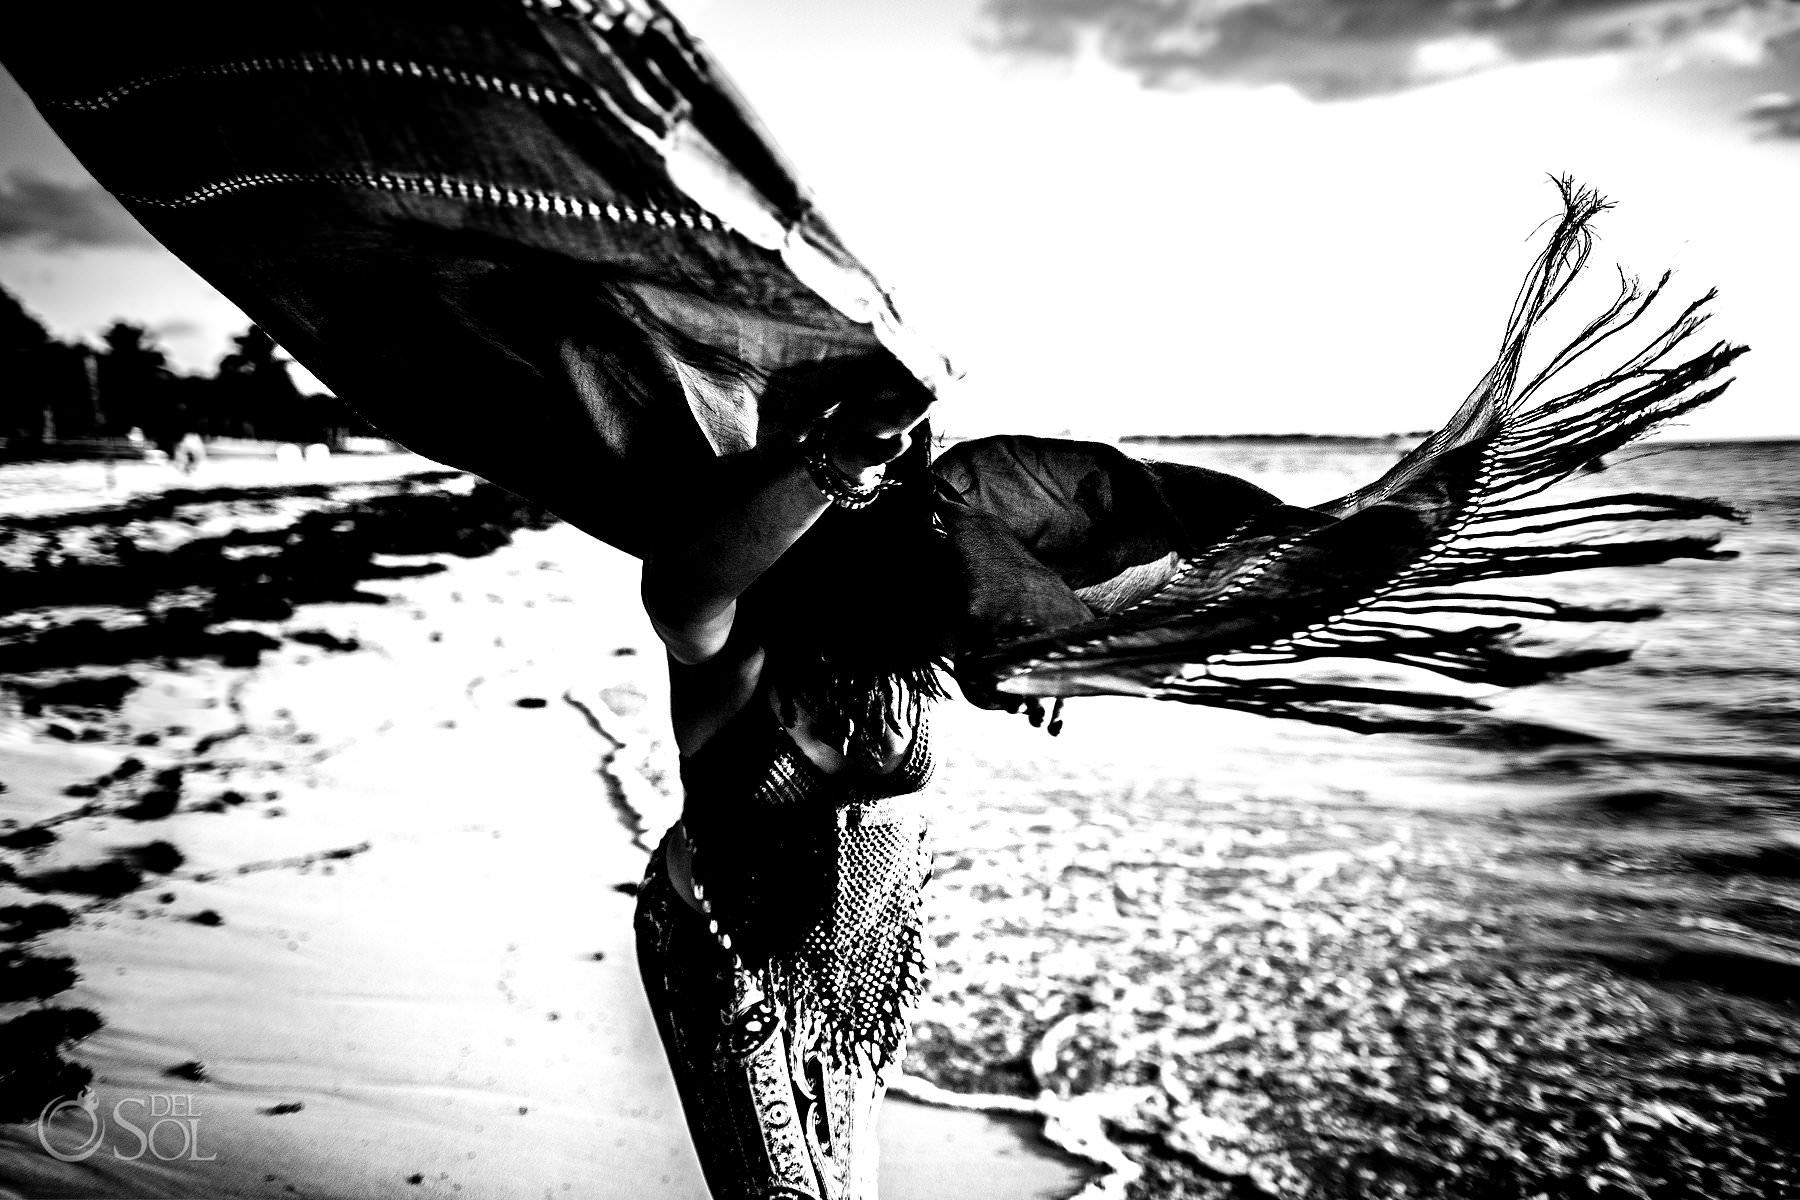  Riviera Maya Alternative Therapy Wings to Fly portrait photography experience